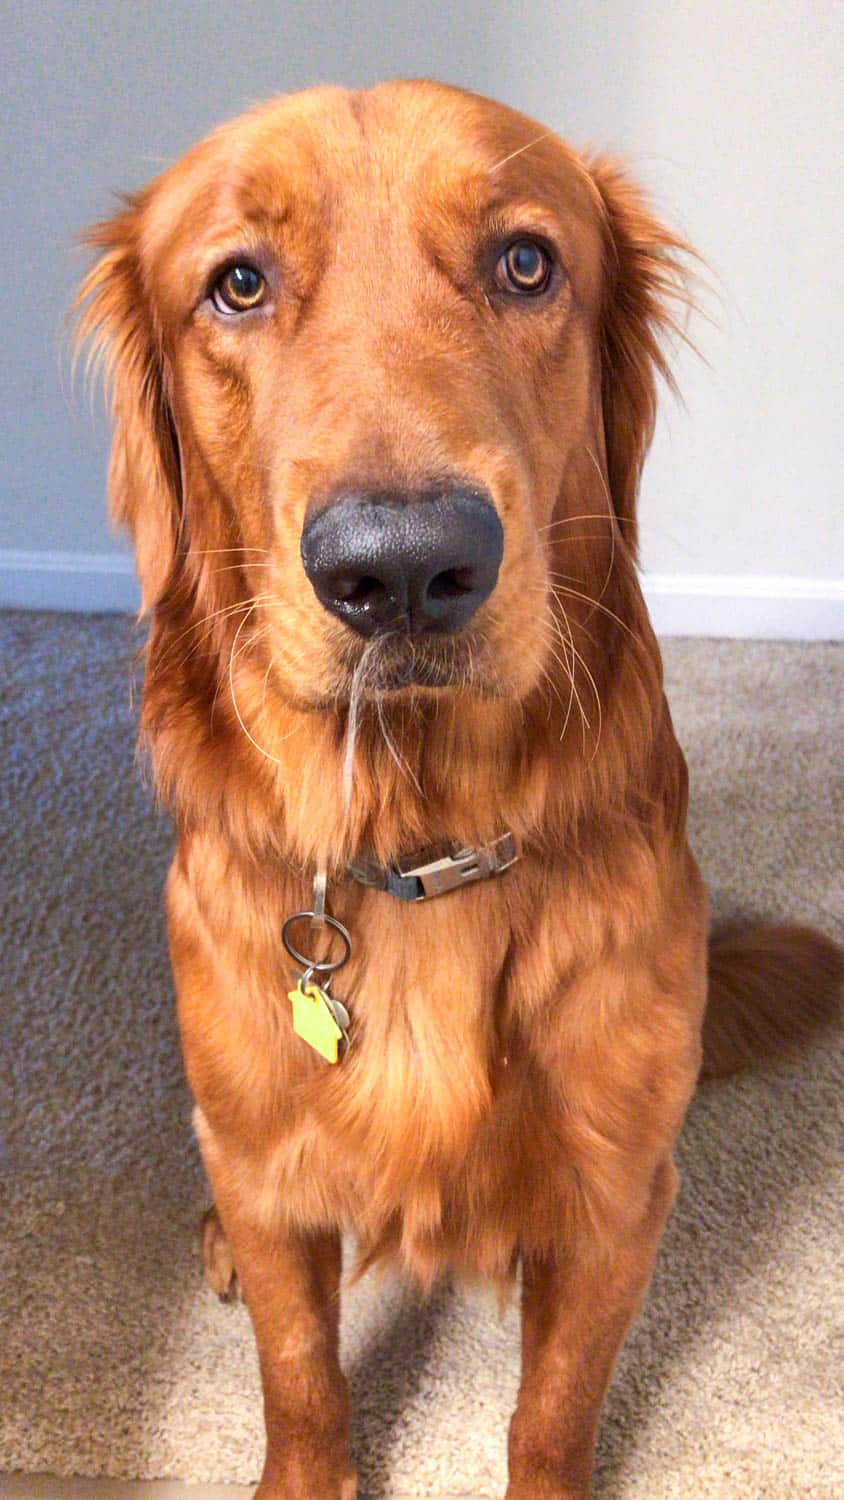 Logan the Golden Dog with cat fur in his mouth.